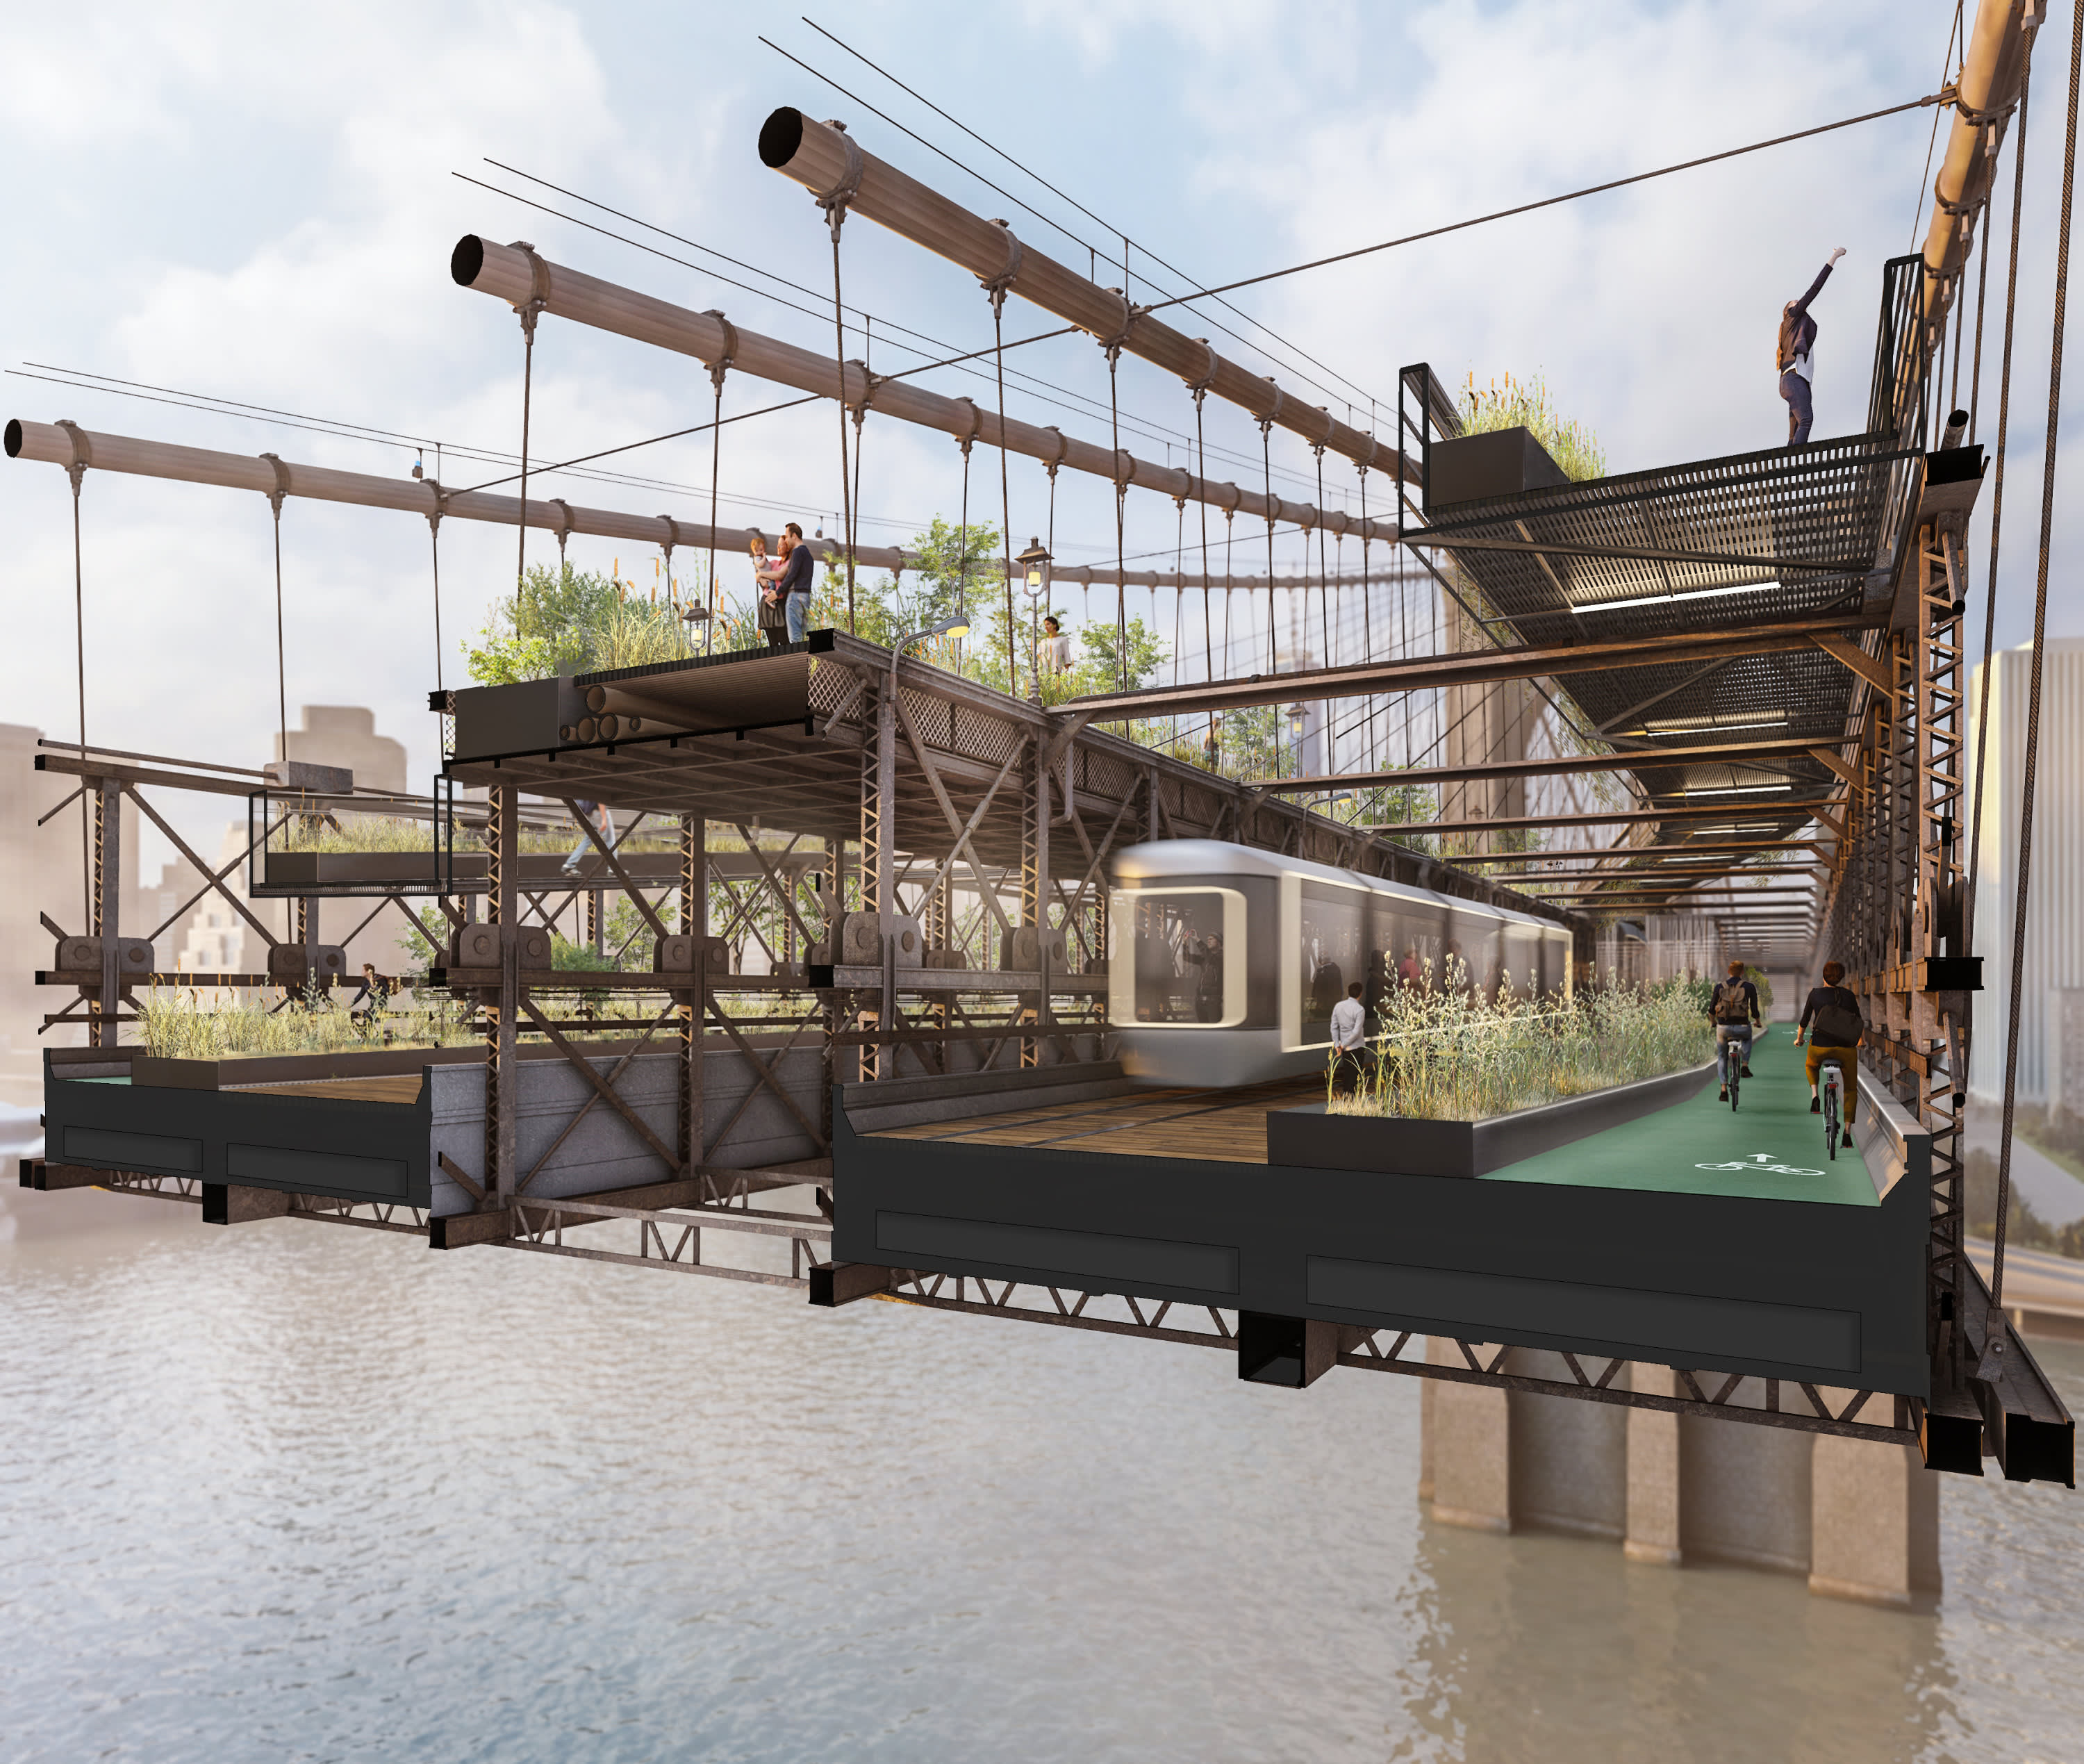 DXA Studio Wins at the 2021 NYCxDESIGN Awards for its Reimagining of the Brooklyn Bridge